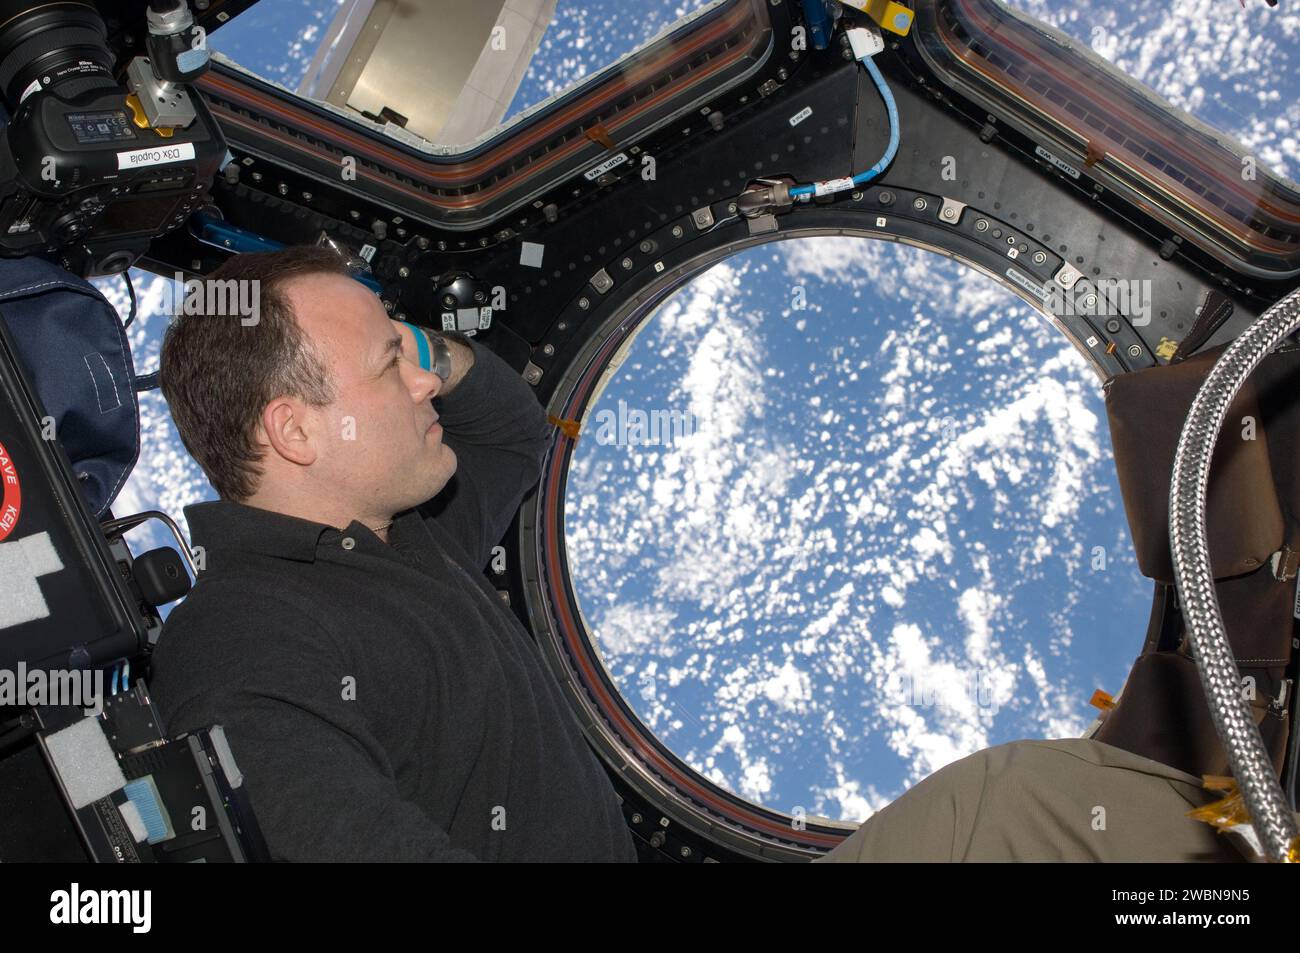 ISS028-E-048088 (11 Sept. 2011) --- NASA astronaut Ron Garan, Expedition 28 flight engineer, views a point on Earth through one of the windows in the Cupola of the International Space Station. Stock Photo